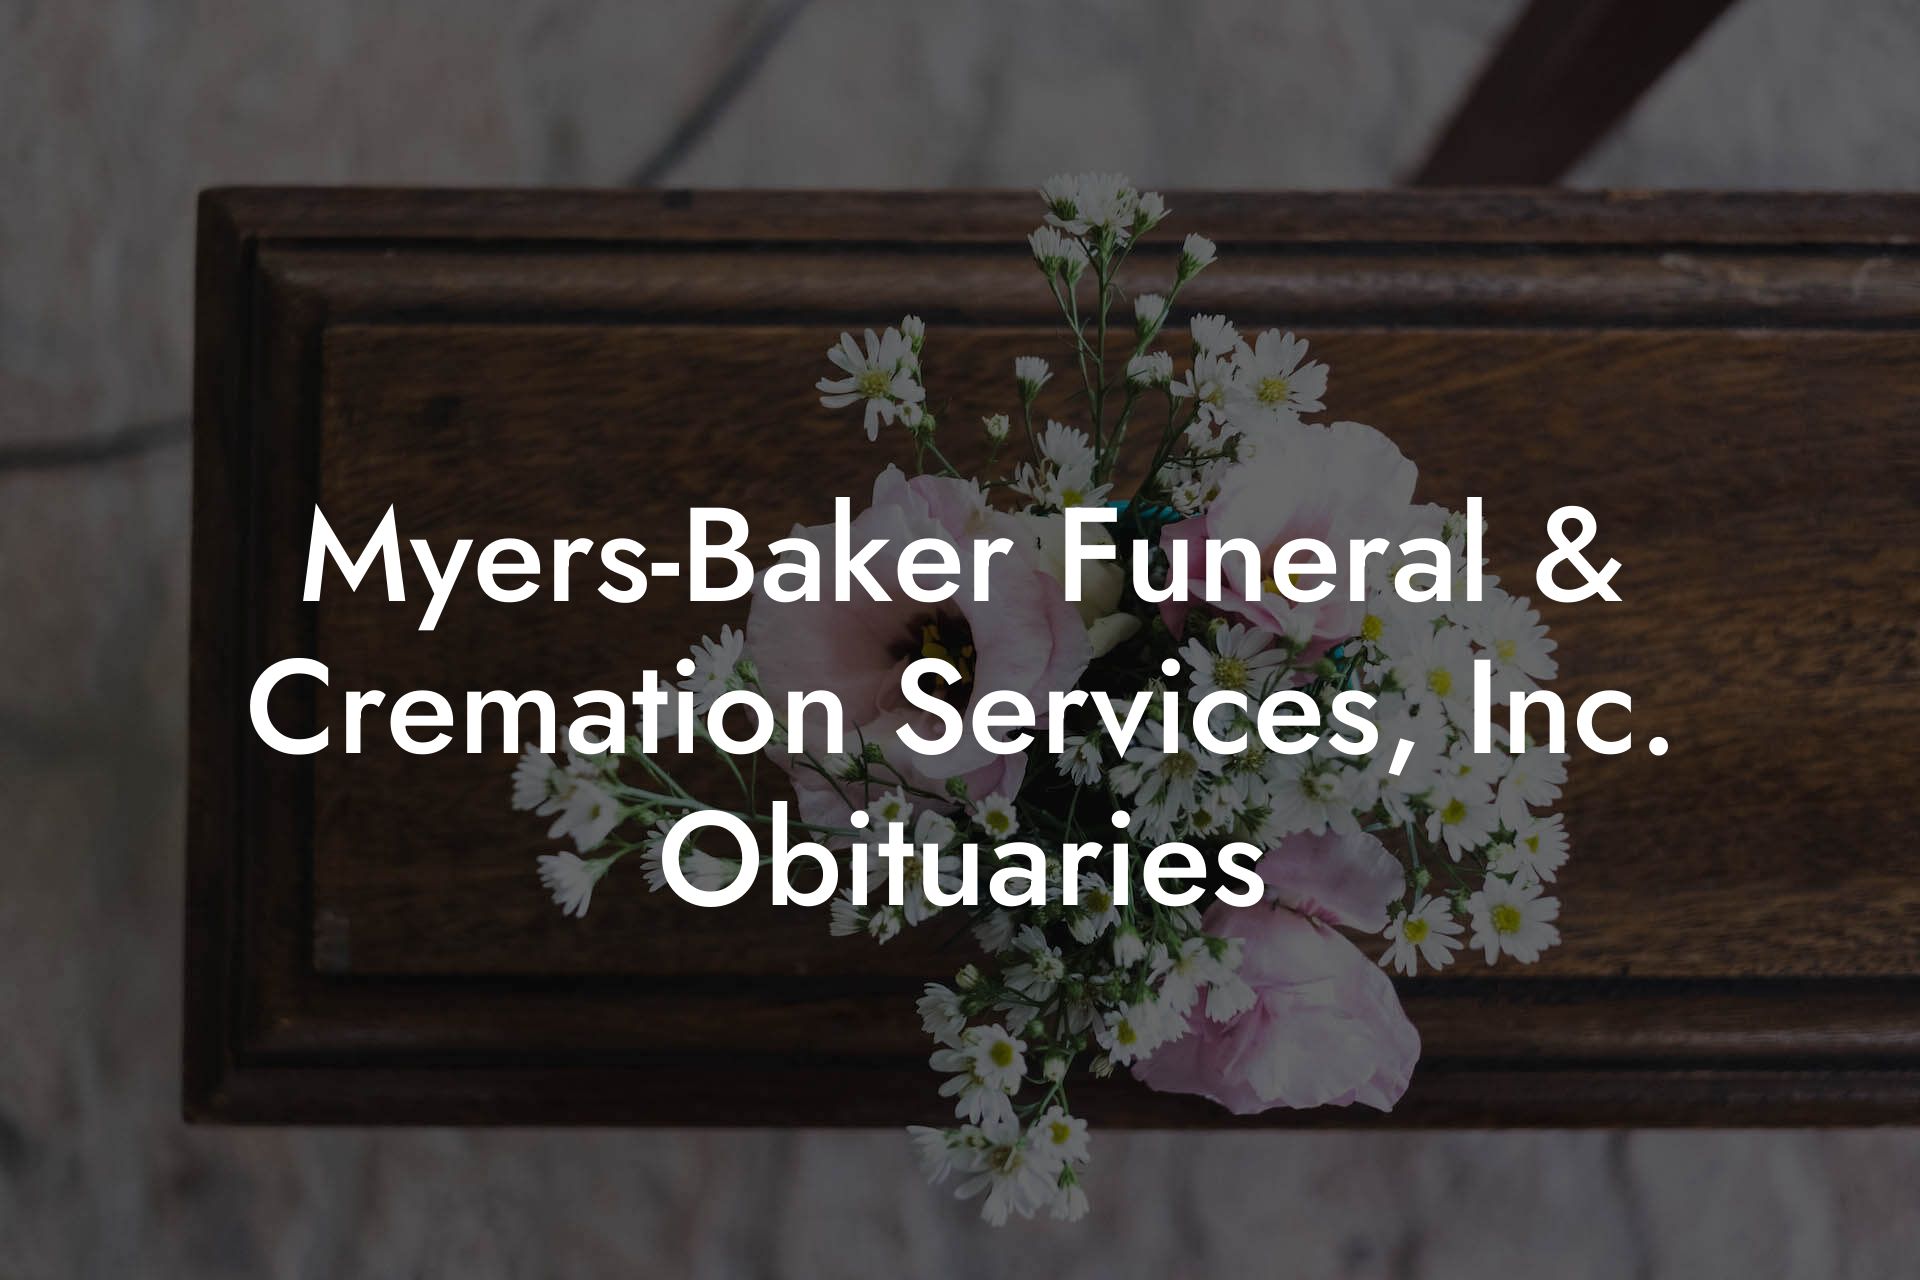 Myers-Baker Funeral & Cremation Services, Inc. Obituaries